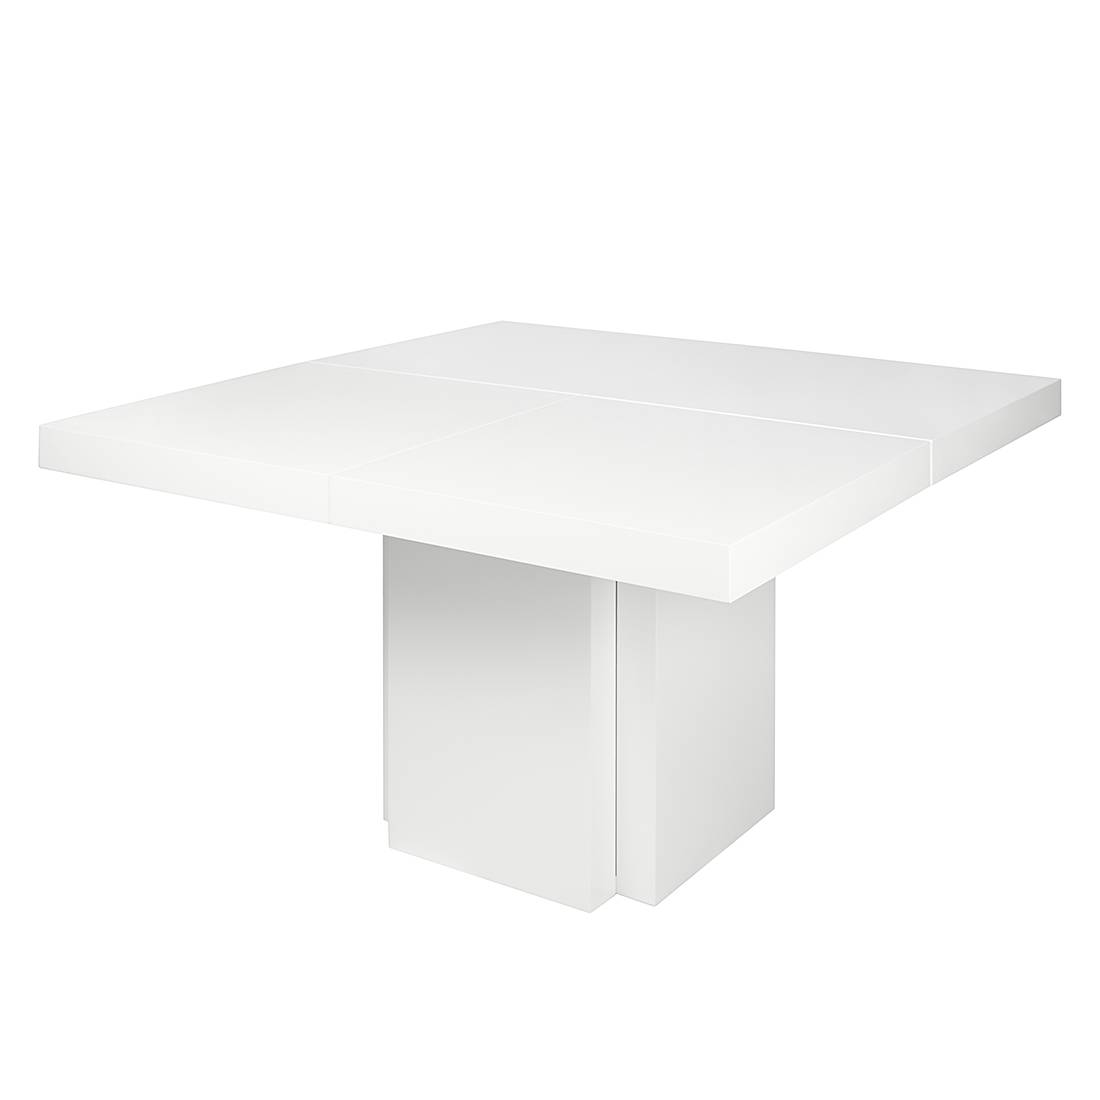 Image of Table Dusk 000000001000095044